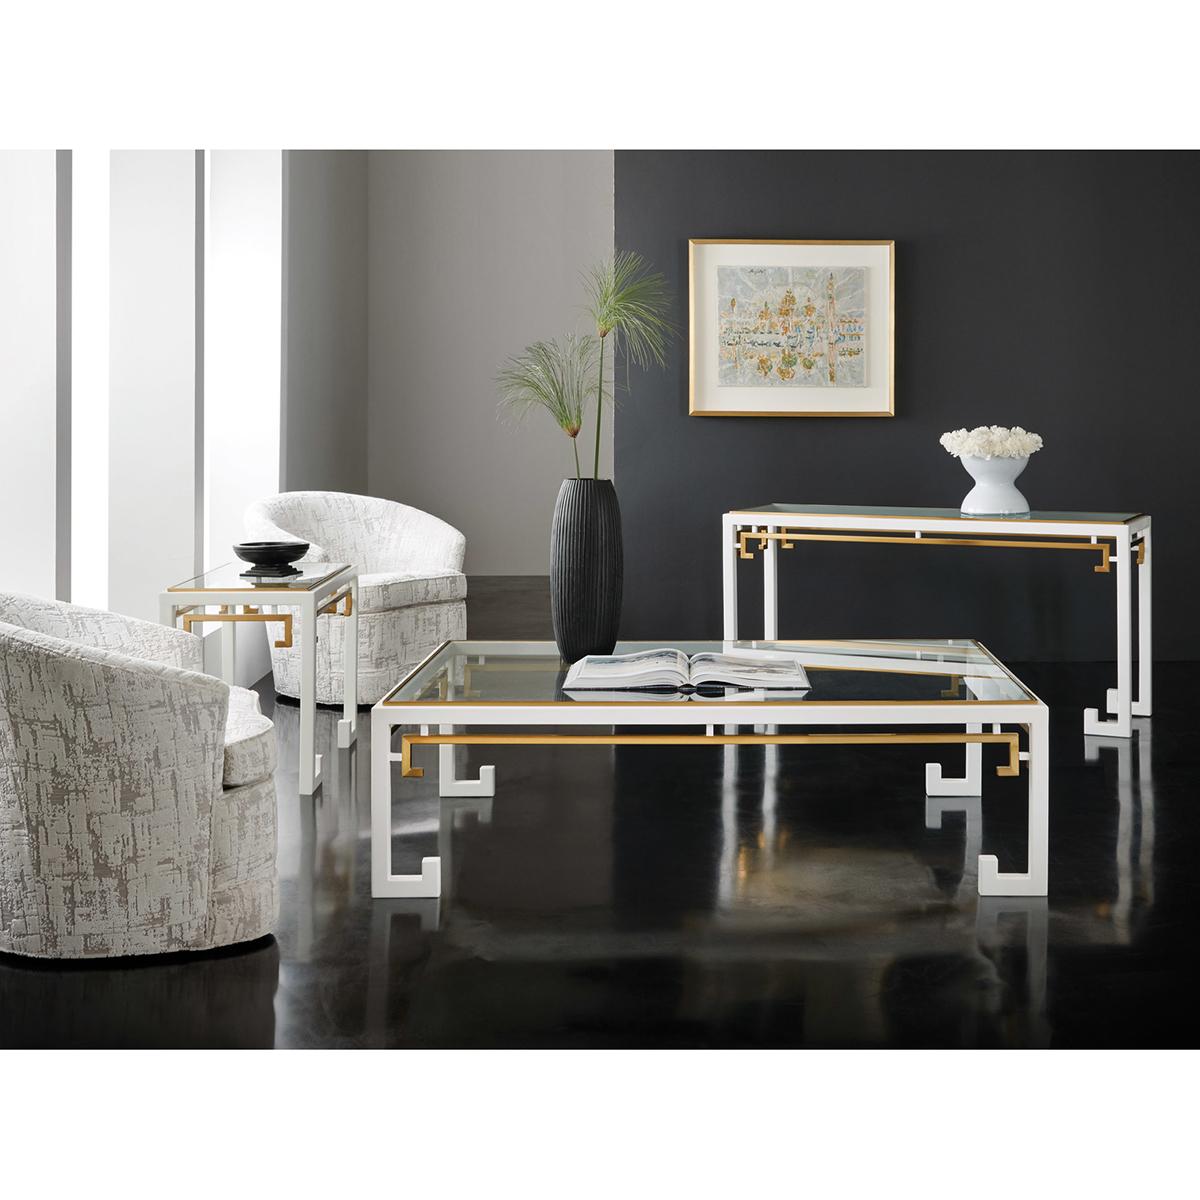 This midcentury chinoiserie console table is an exquisite blend of classic Asian and modern midcentury styles. With its striking white paint, brass metal accents, and clear glass top, it is a perfect example of functional art that will add a touch